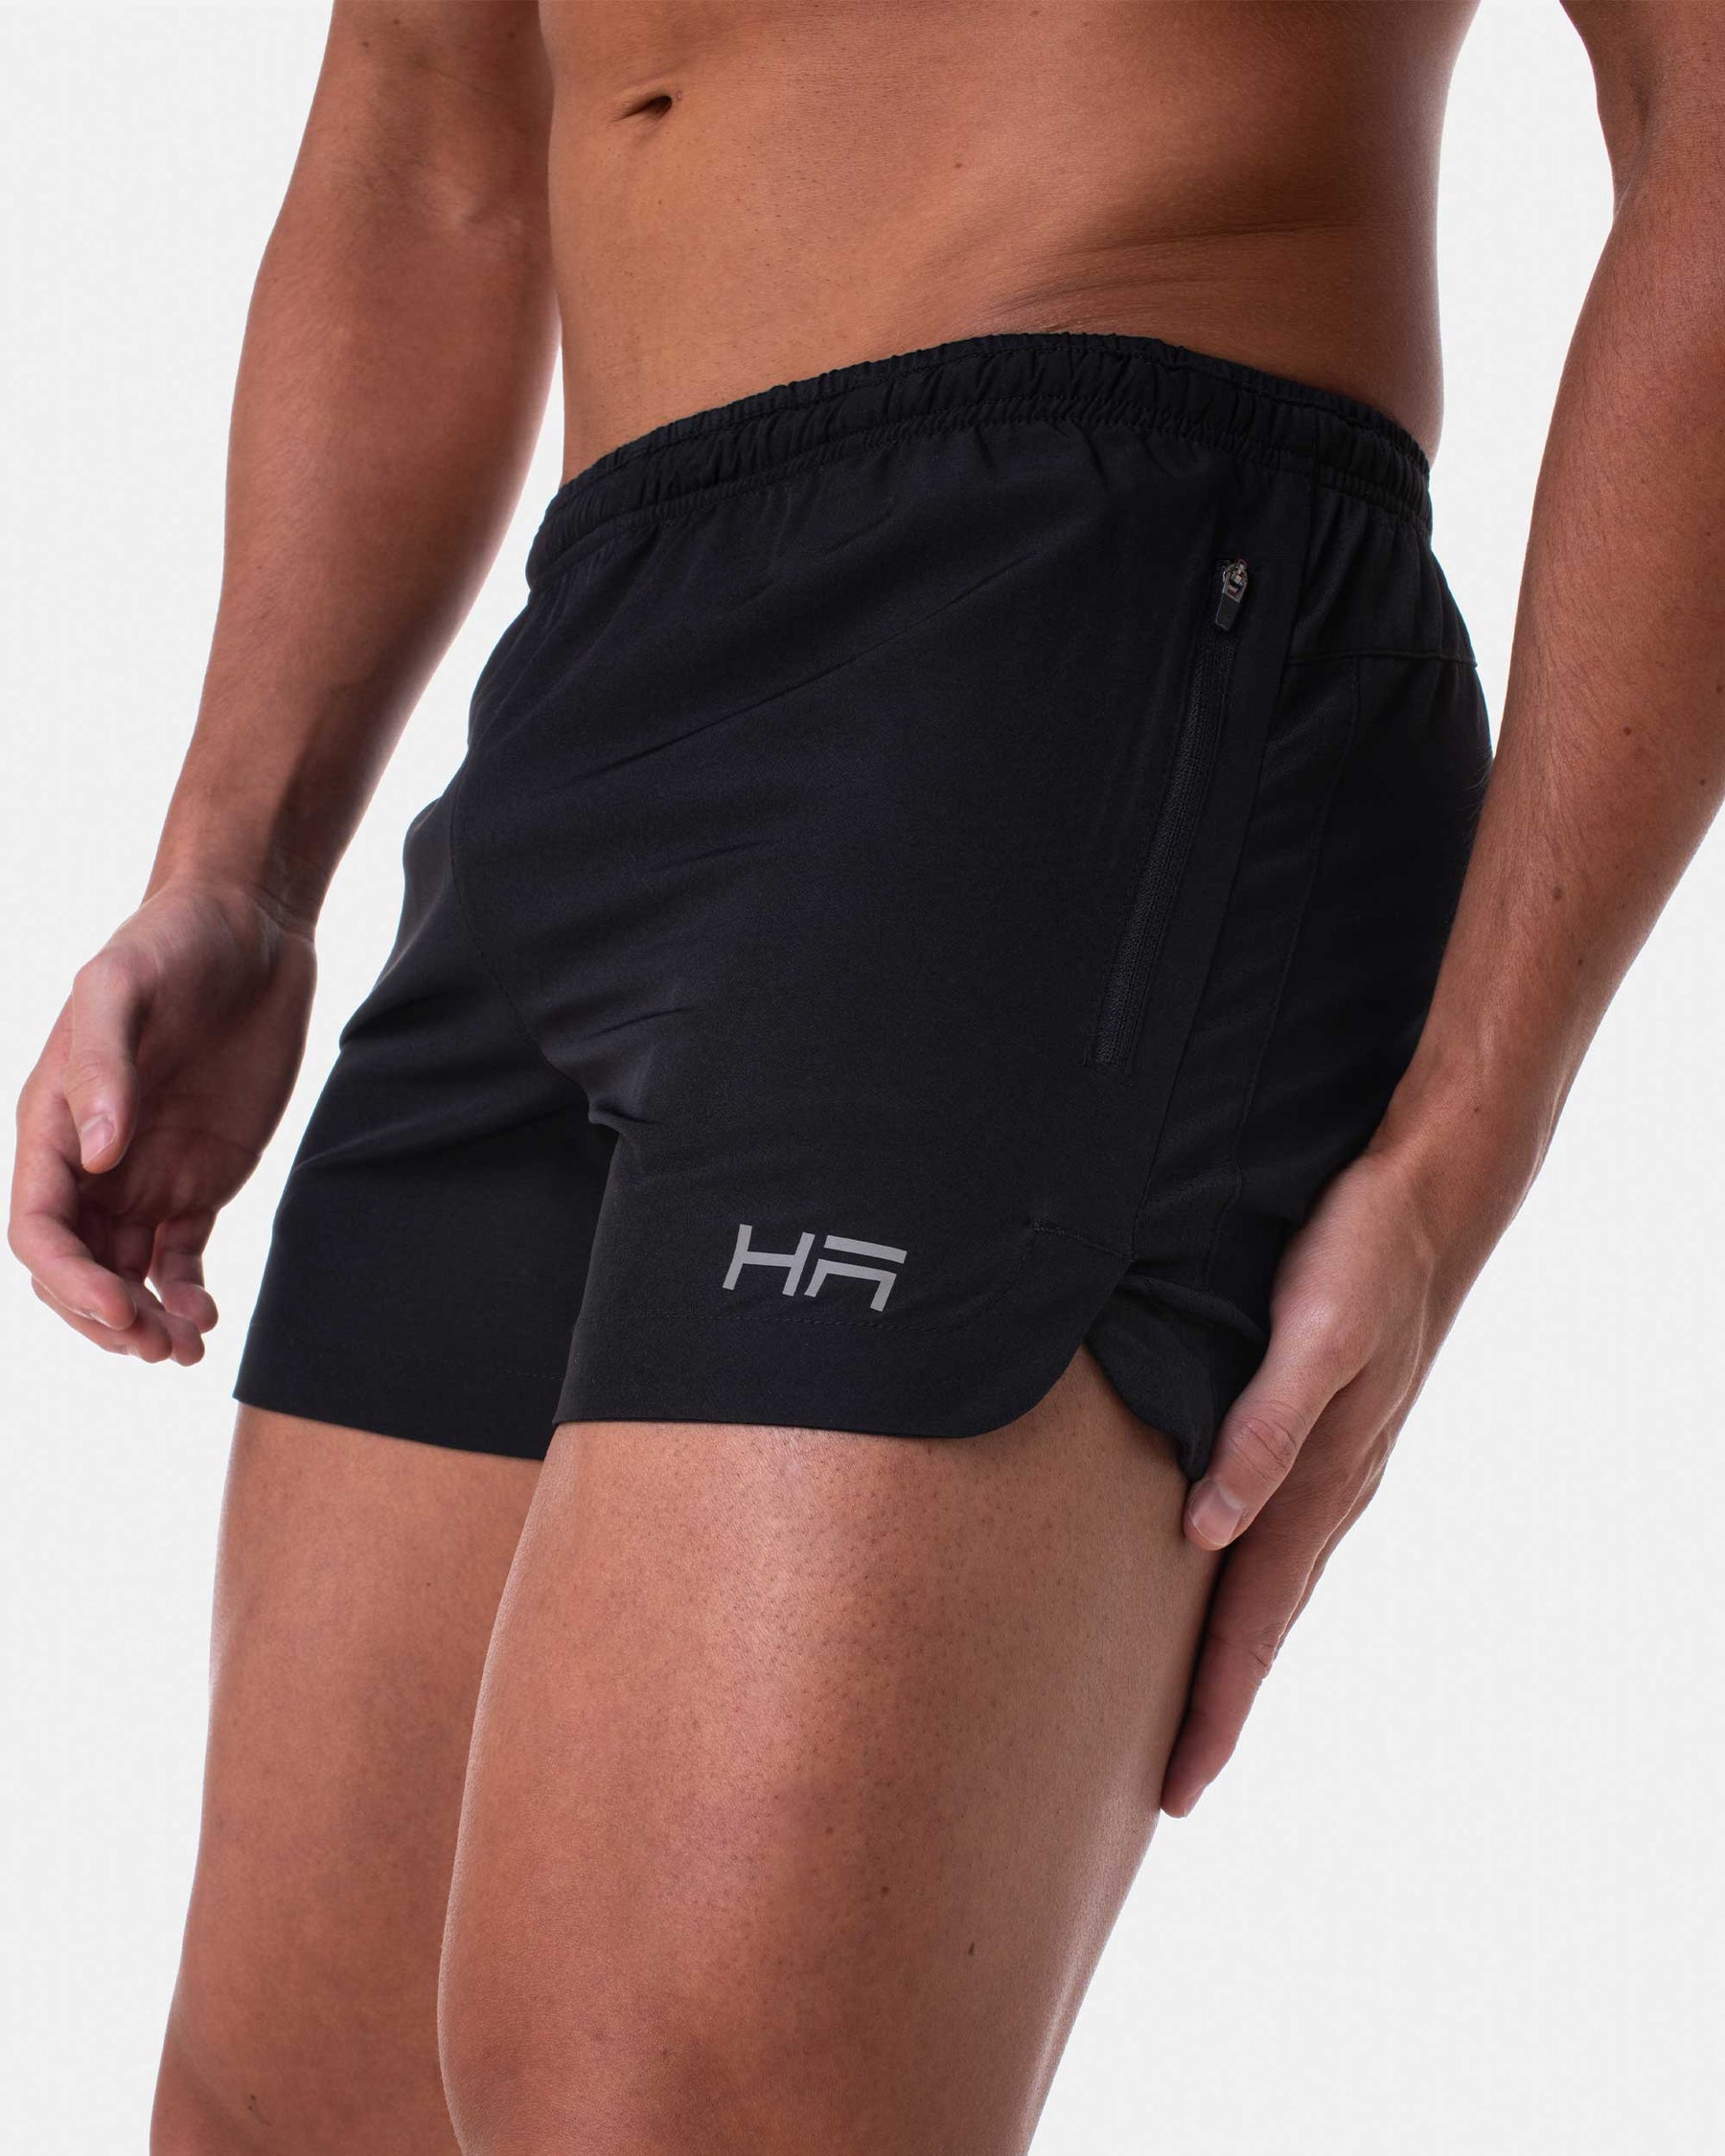 Gym Shorts with Compression Liner: The Hybrid Short from Avalon